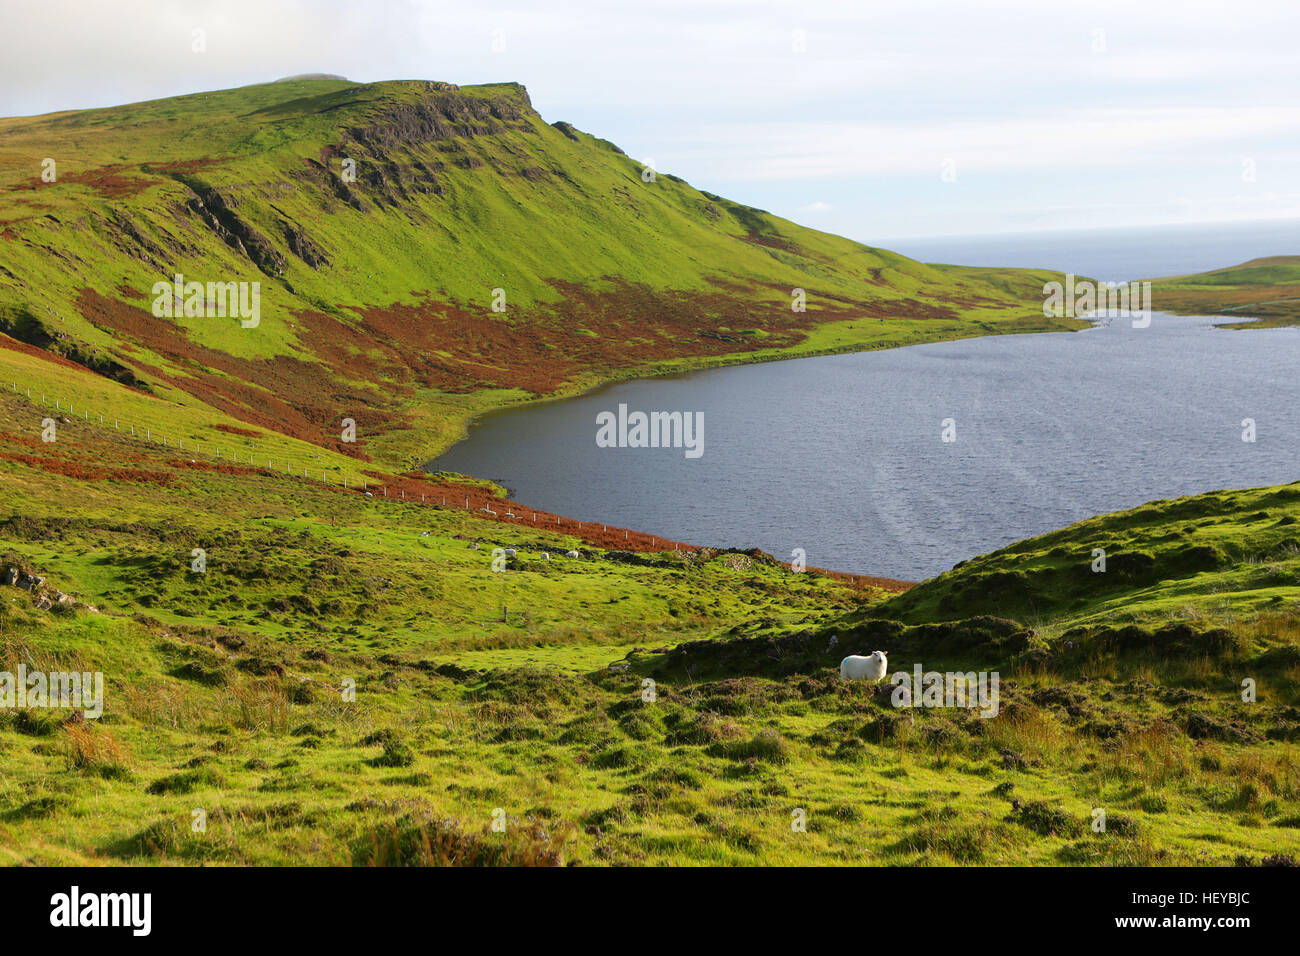 Neist Point is a viewpoint on the most westerly point of Isle of Skye, Scotland. Sheeps in the pasture. Stock Photo